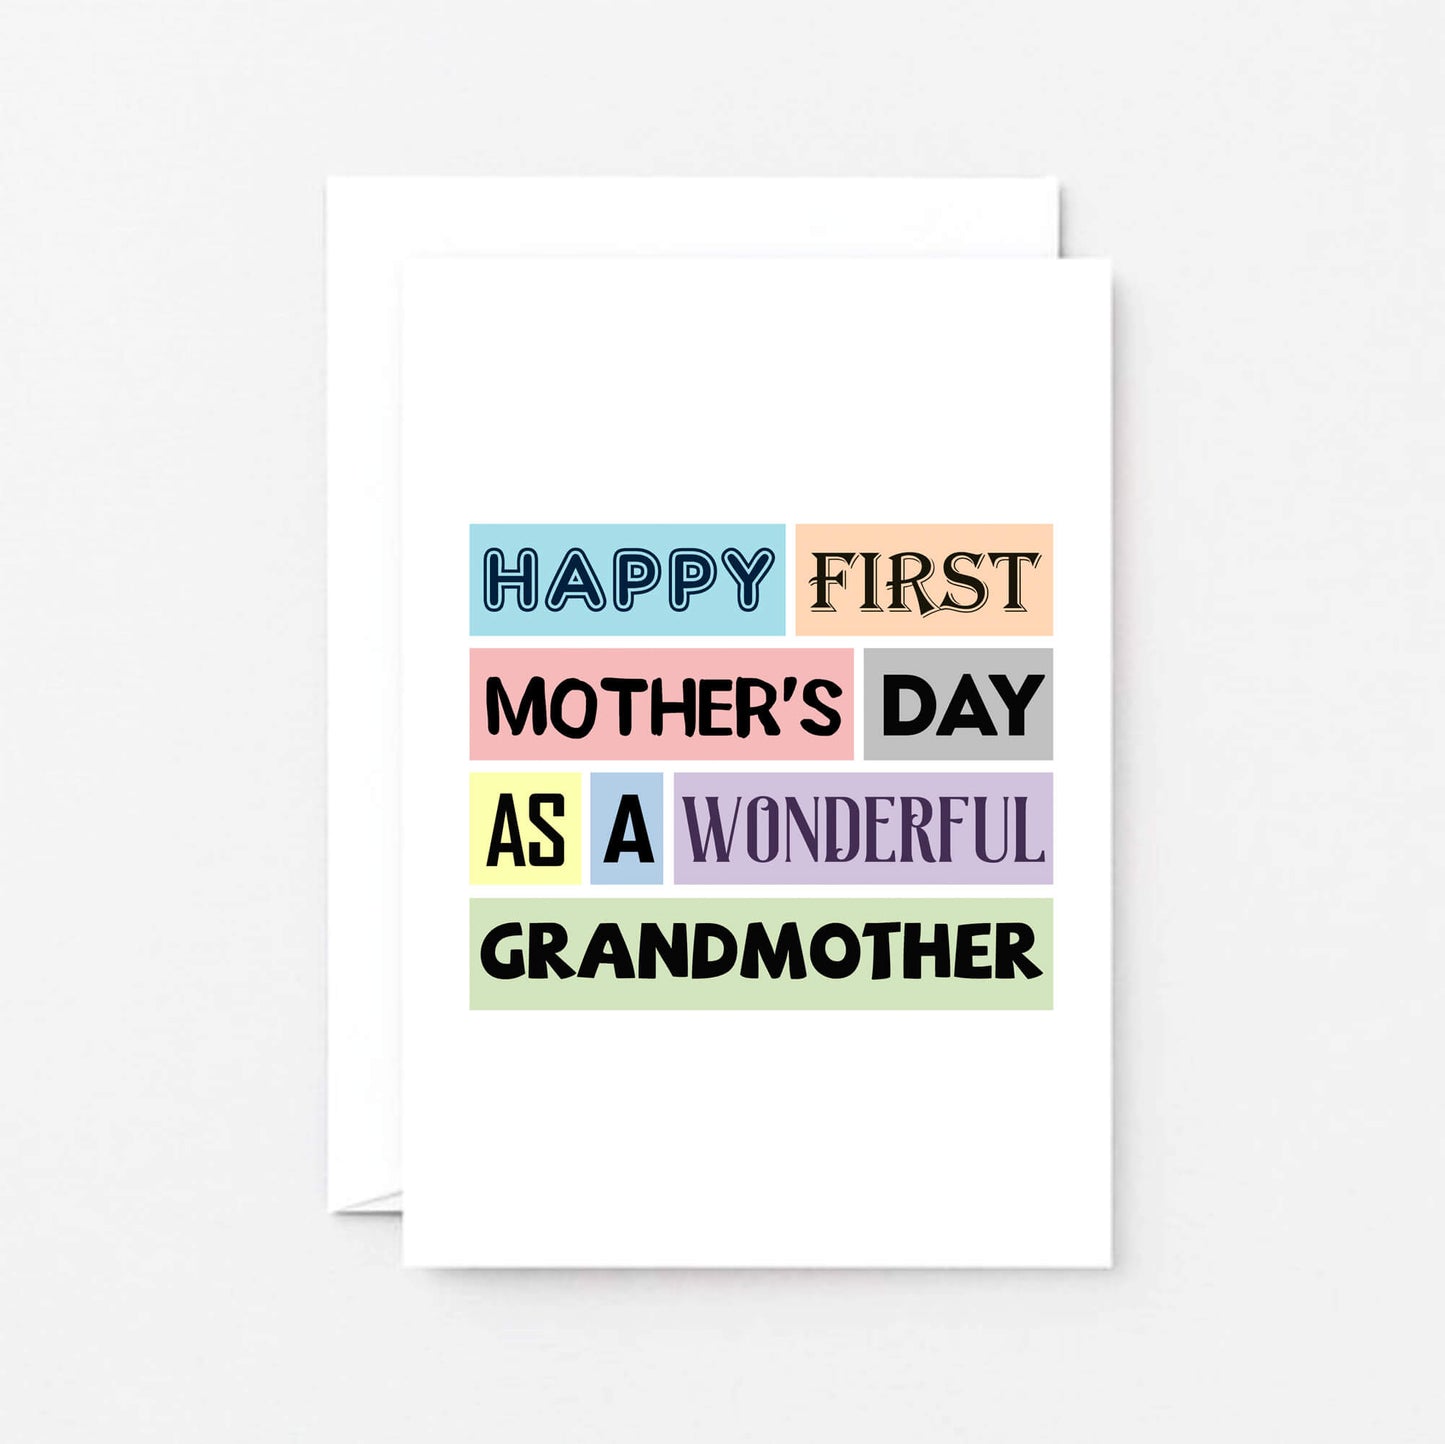 Grandmother Mother's Day Card by SixElevenCreations. Reads Happy First Mother's Day as a wonderful grandmother. Product Code SEM0001A6